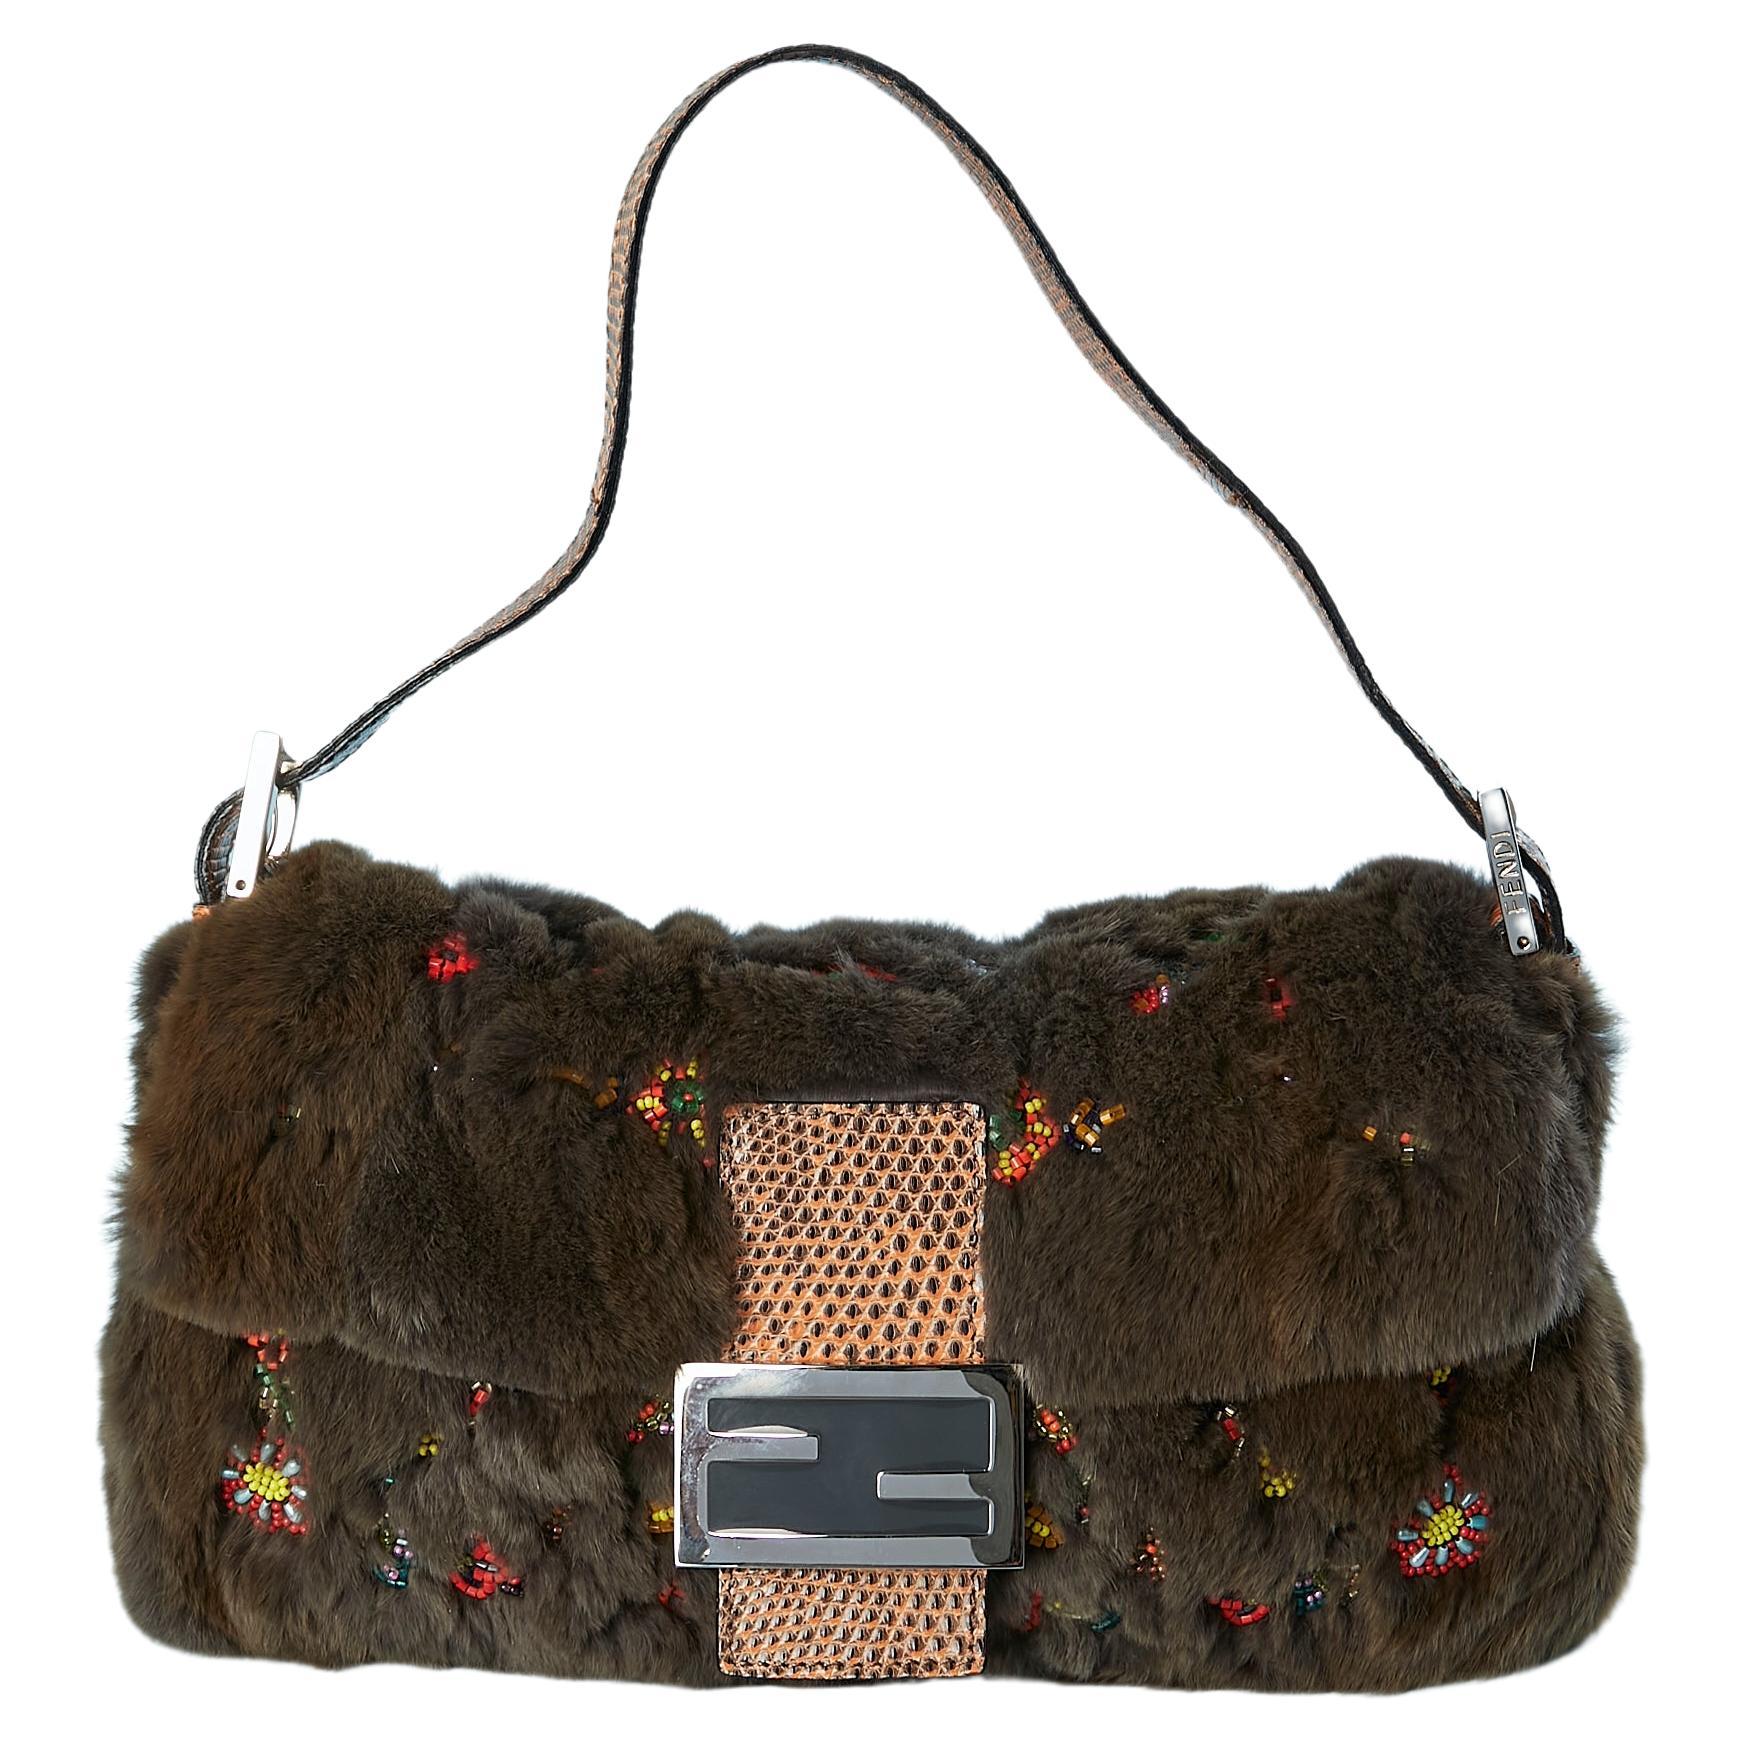 Baguette bag in brown fur, python leather and beads FENDI 